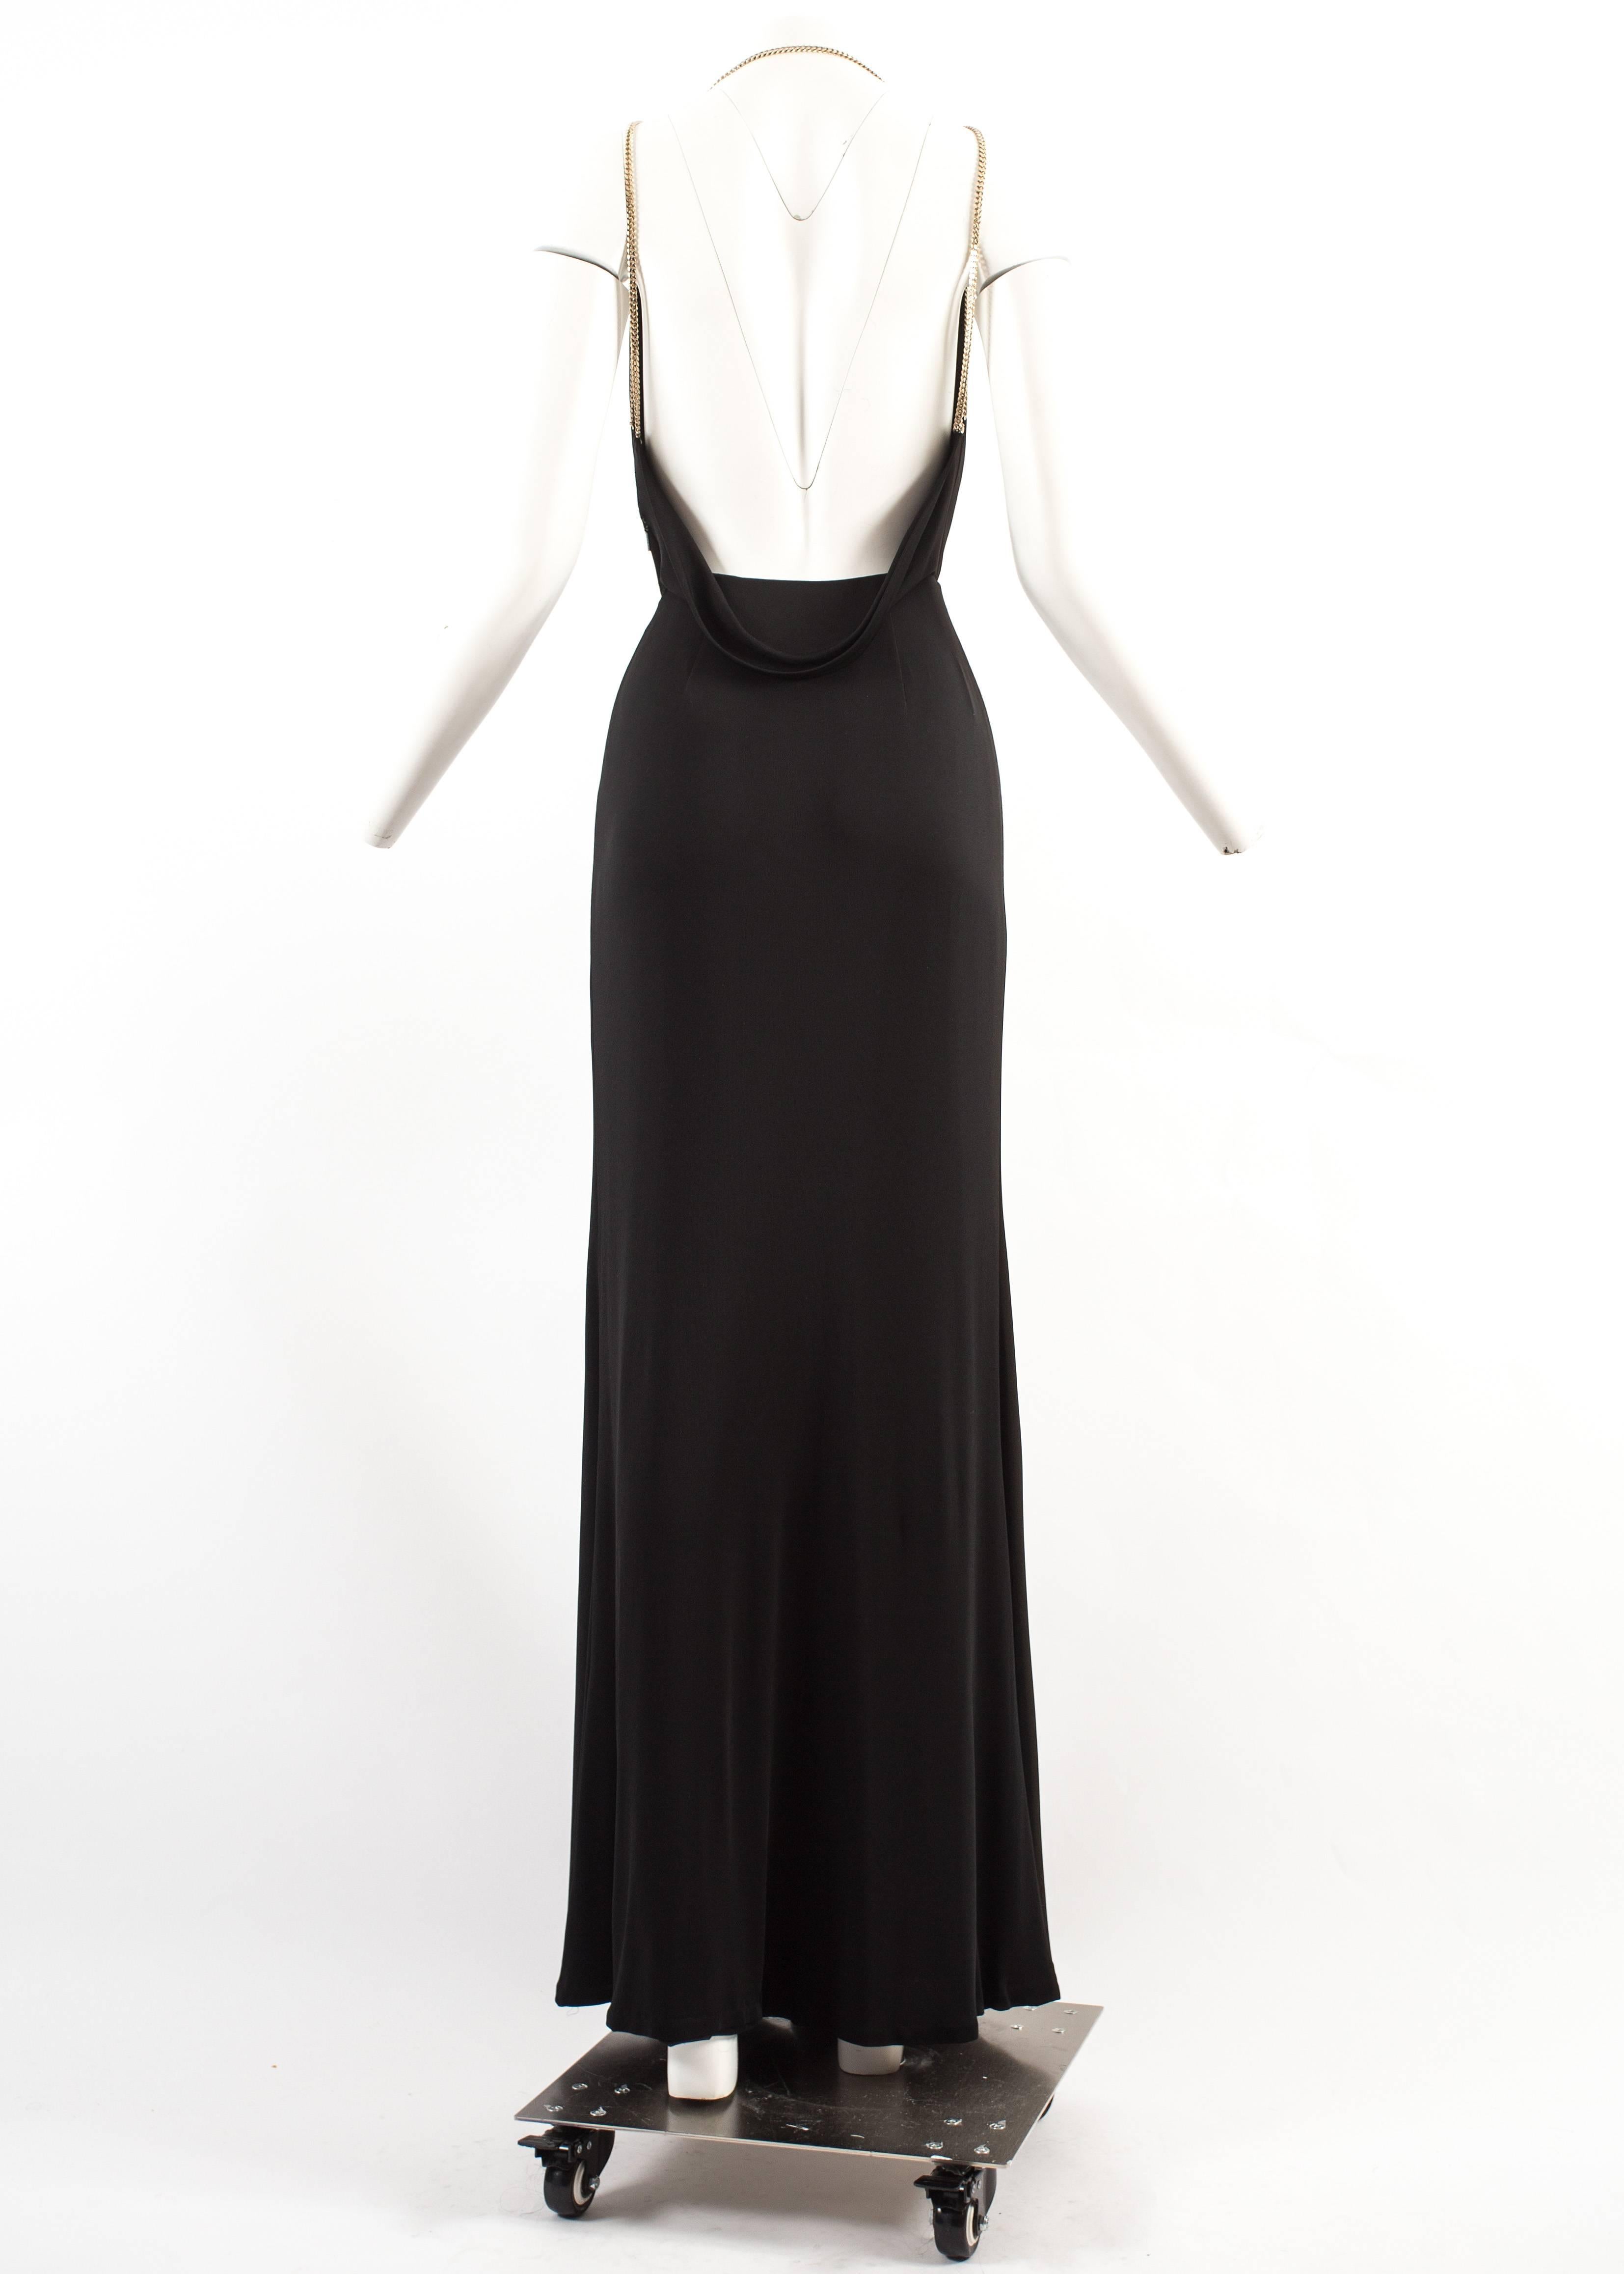 Gucci Autumn-Winter 2006 backless black evening dress with metal chains and front leg slit